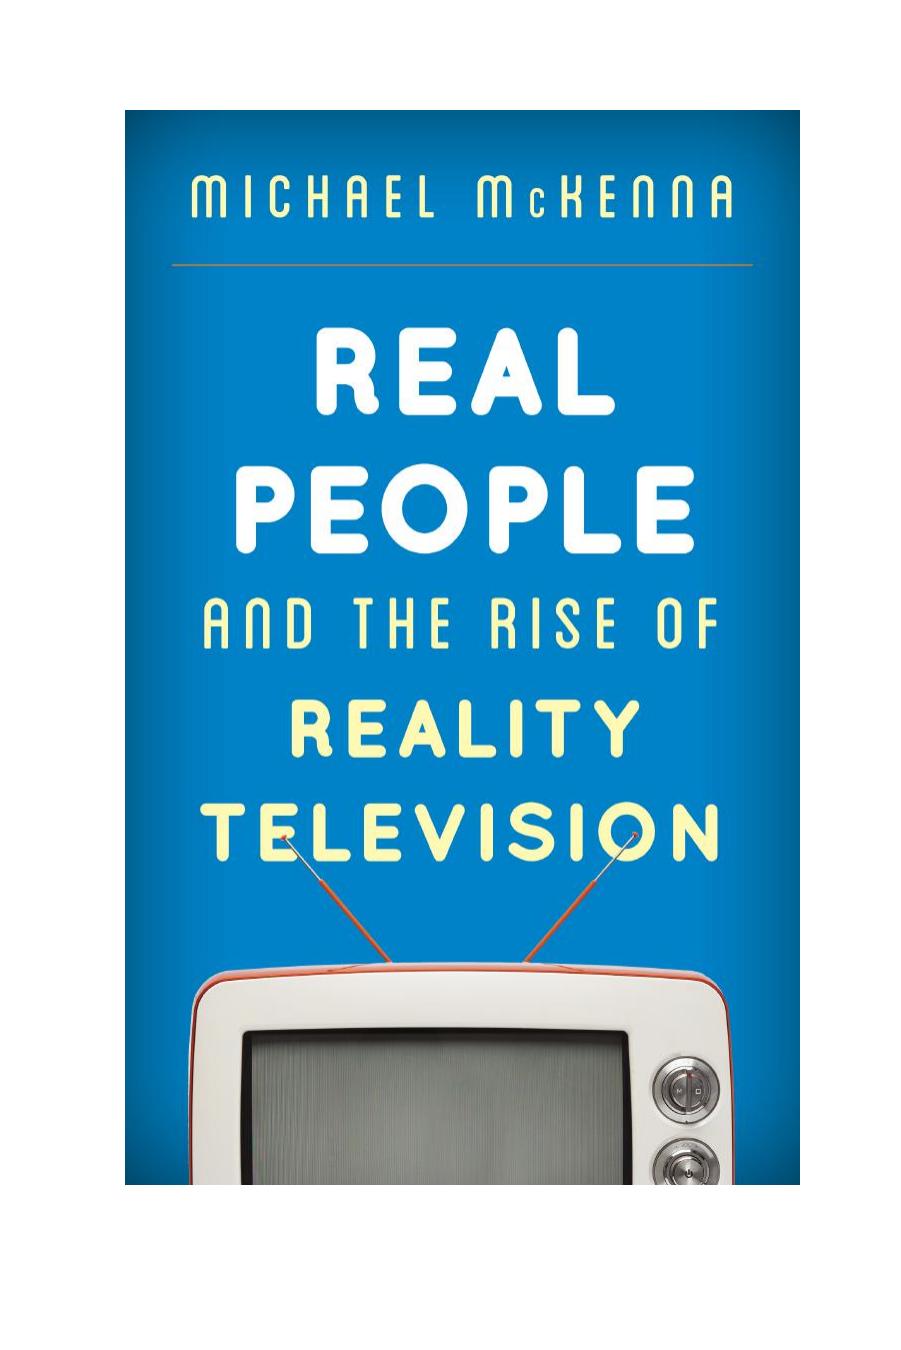 Real People and the Rise of Reality Television by Michael McKenna